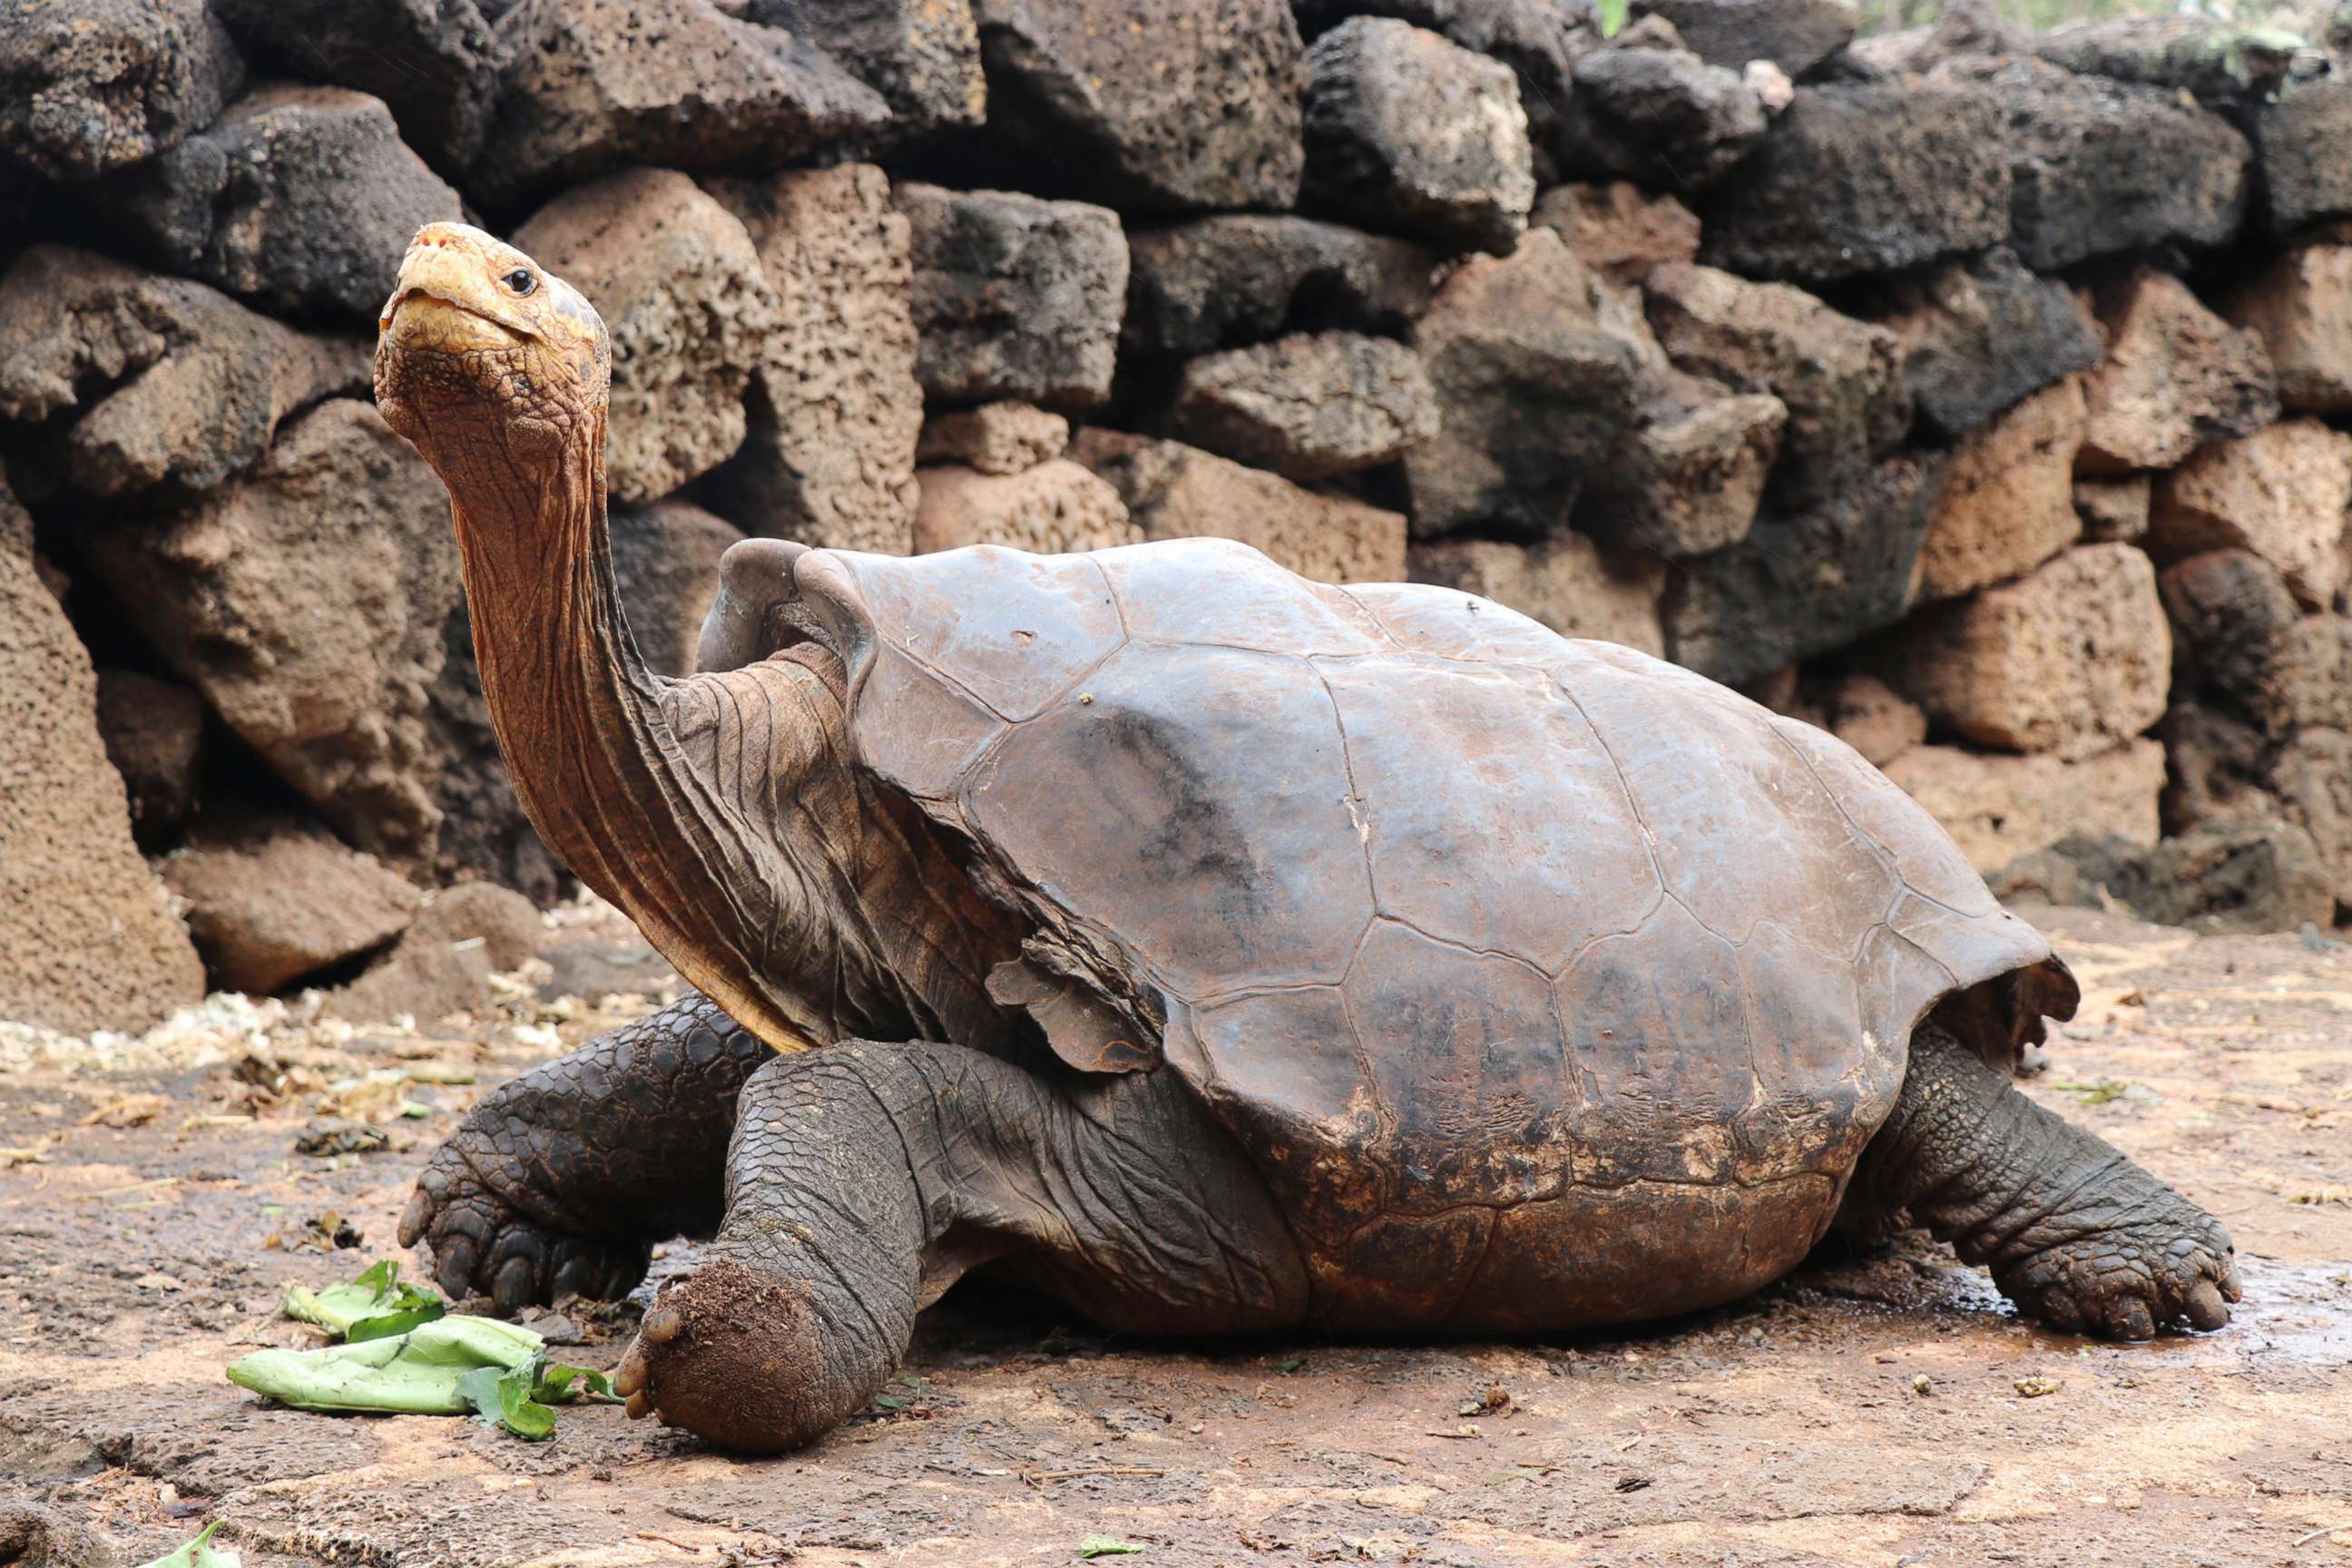 PHOTO: Diego, the giant tortoise helped to save his species by procreating 800 turtles is pictured in Galapagos, Ecuador, Jan. 9, 2020.